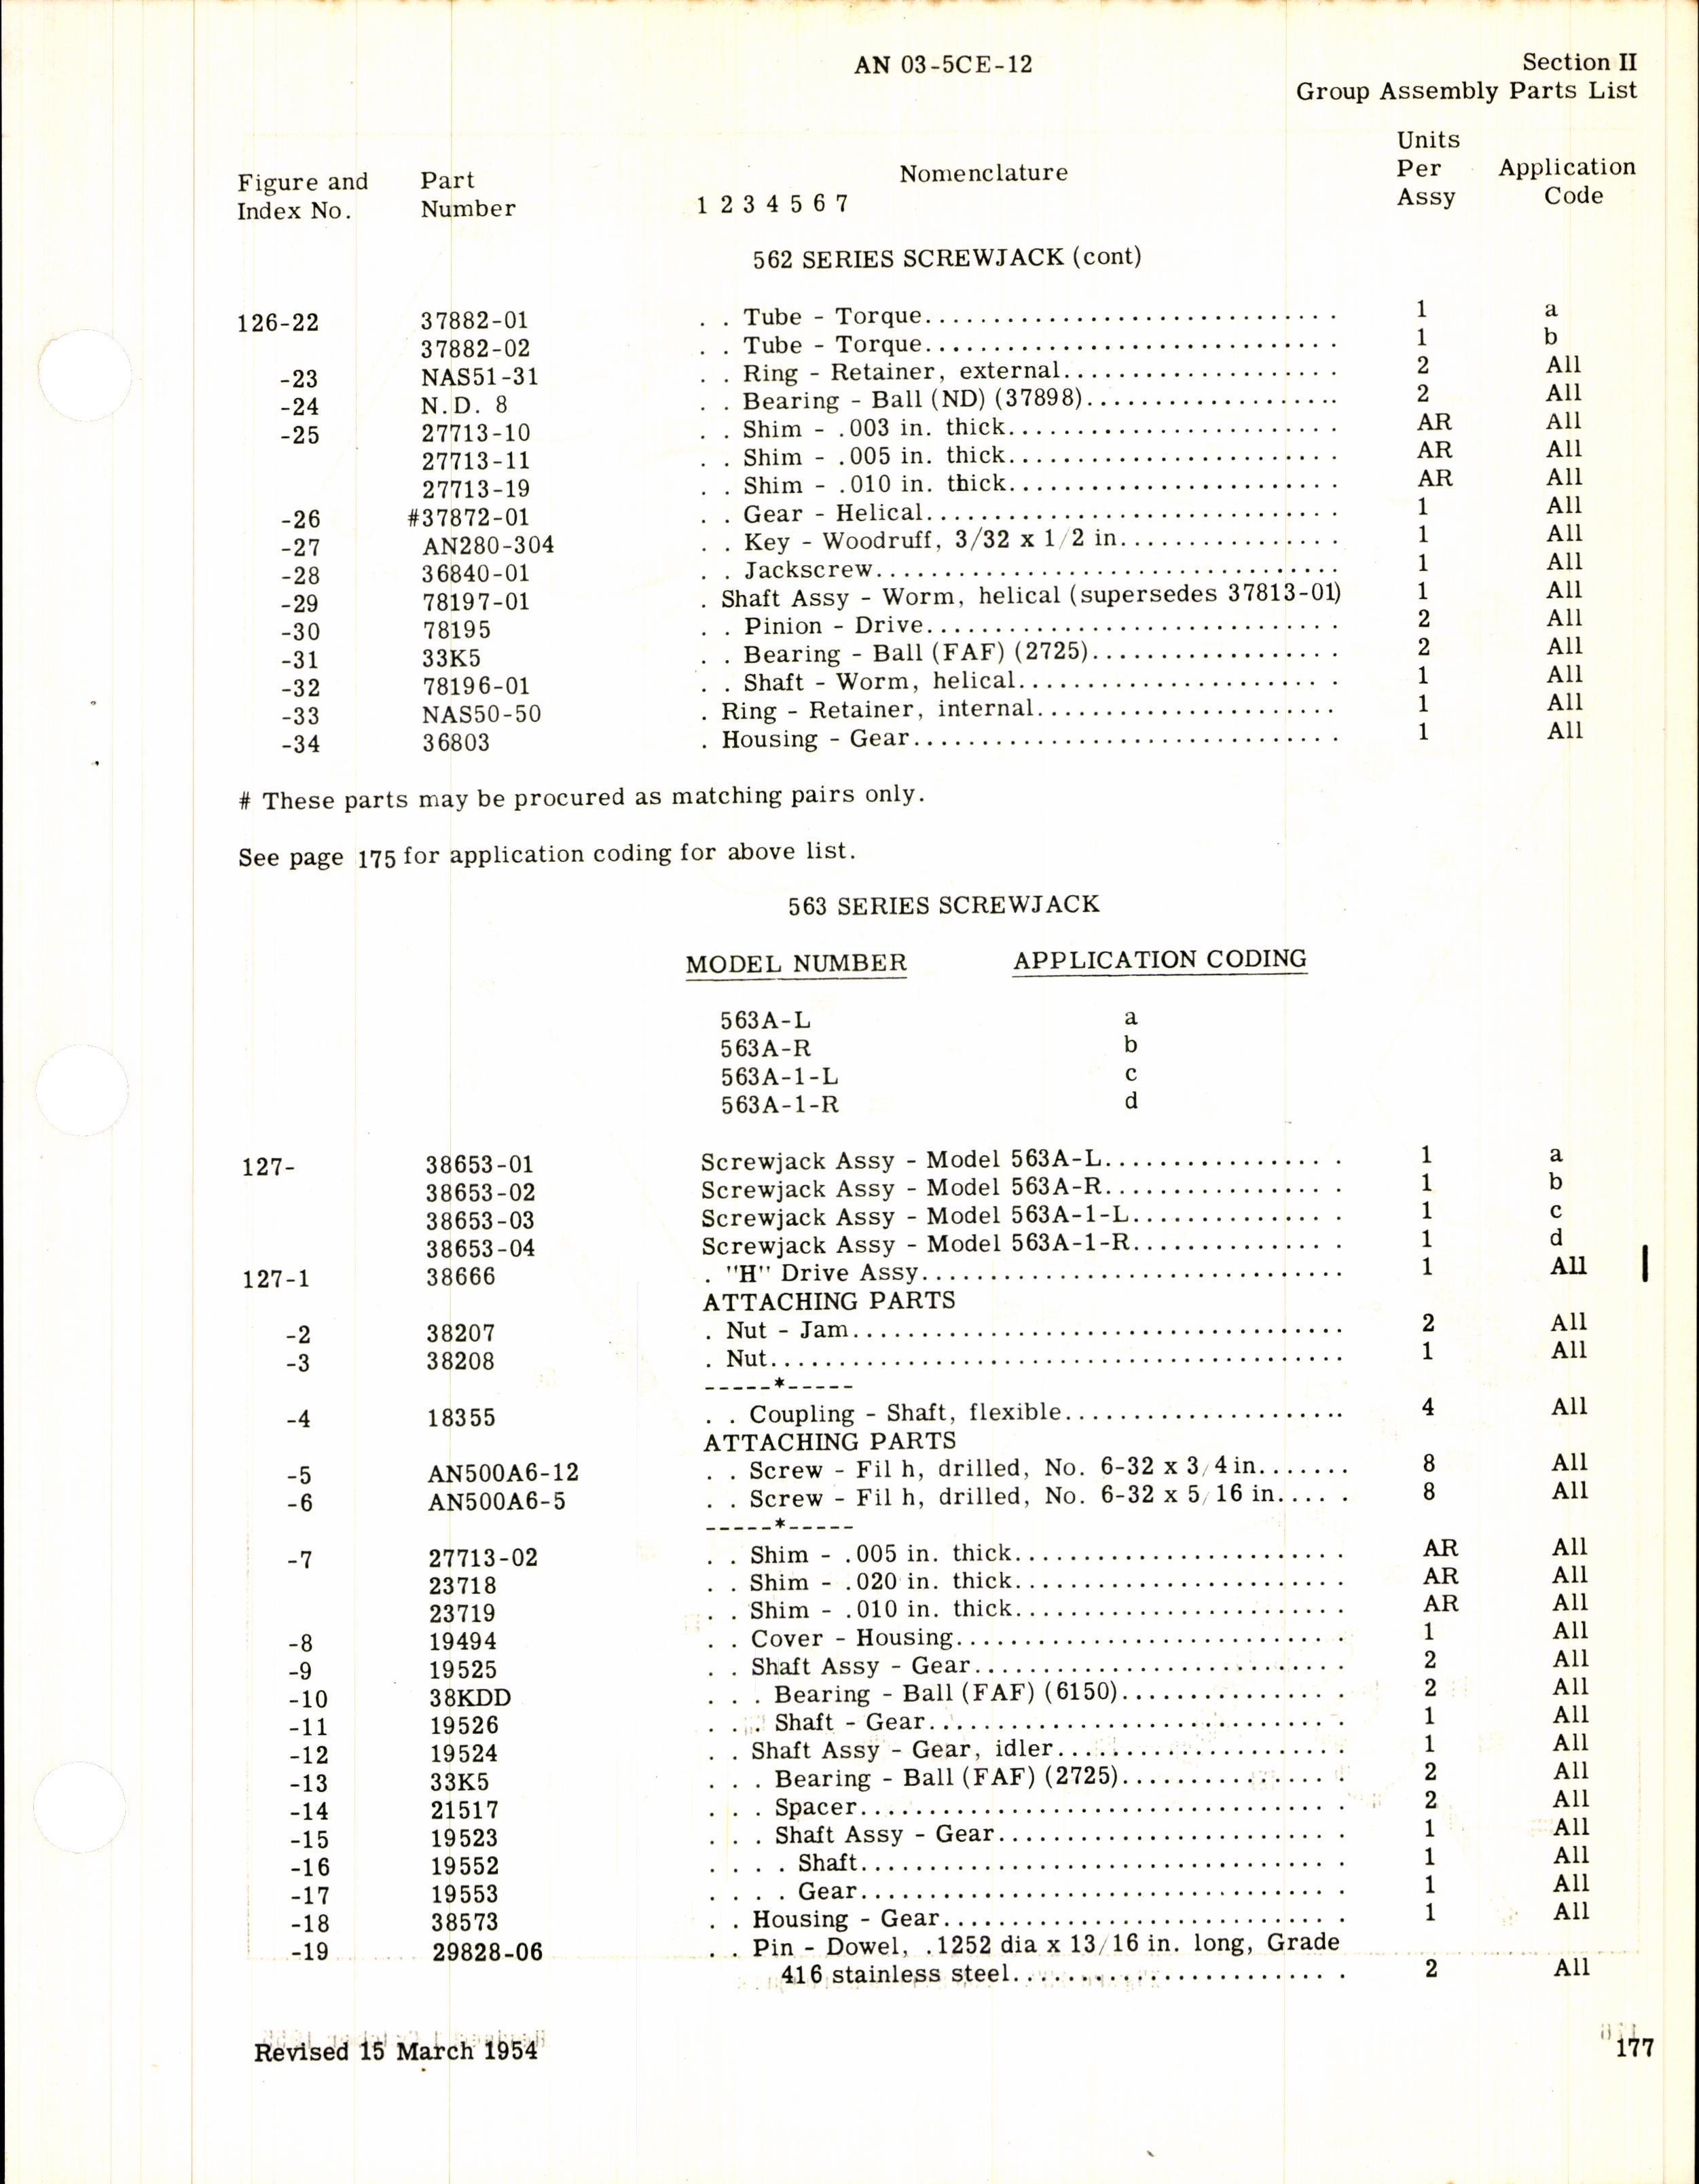 Sample page 7 from AirCorps Library document: Parts Catalog for Gearboxes, Screwjacks, Flexible Shafting, & Flexible Shaft Accessories